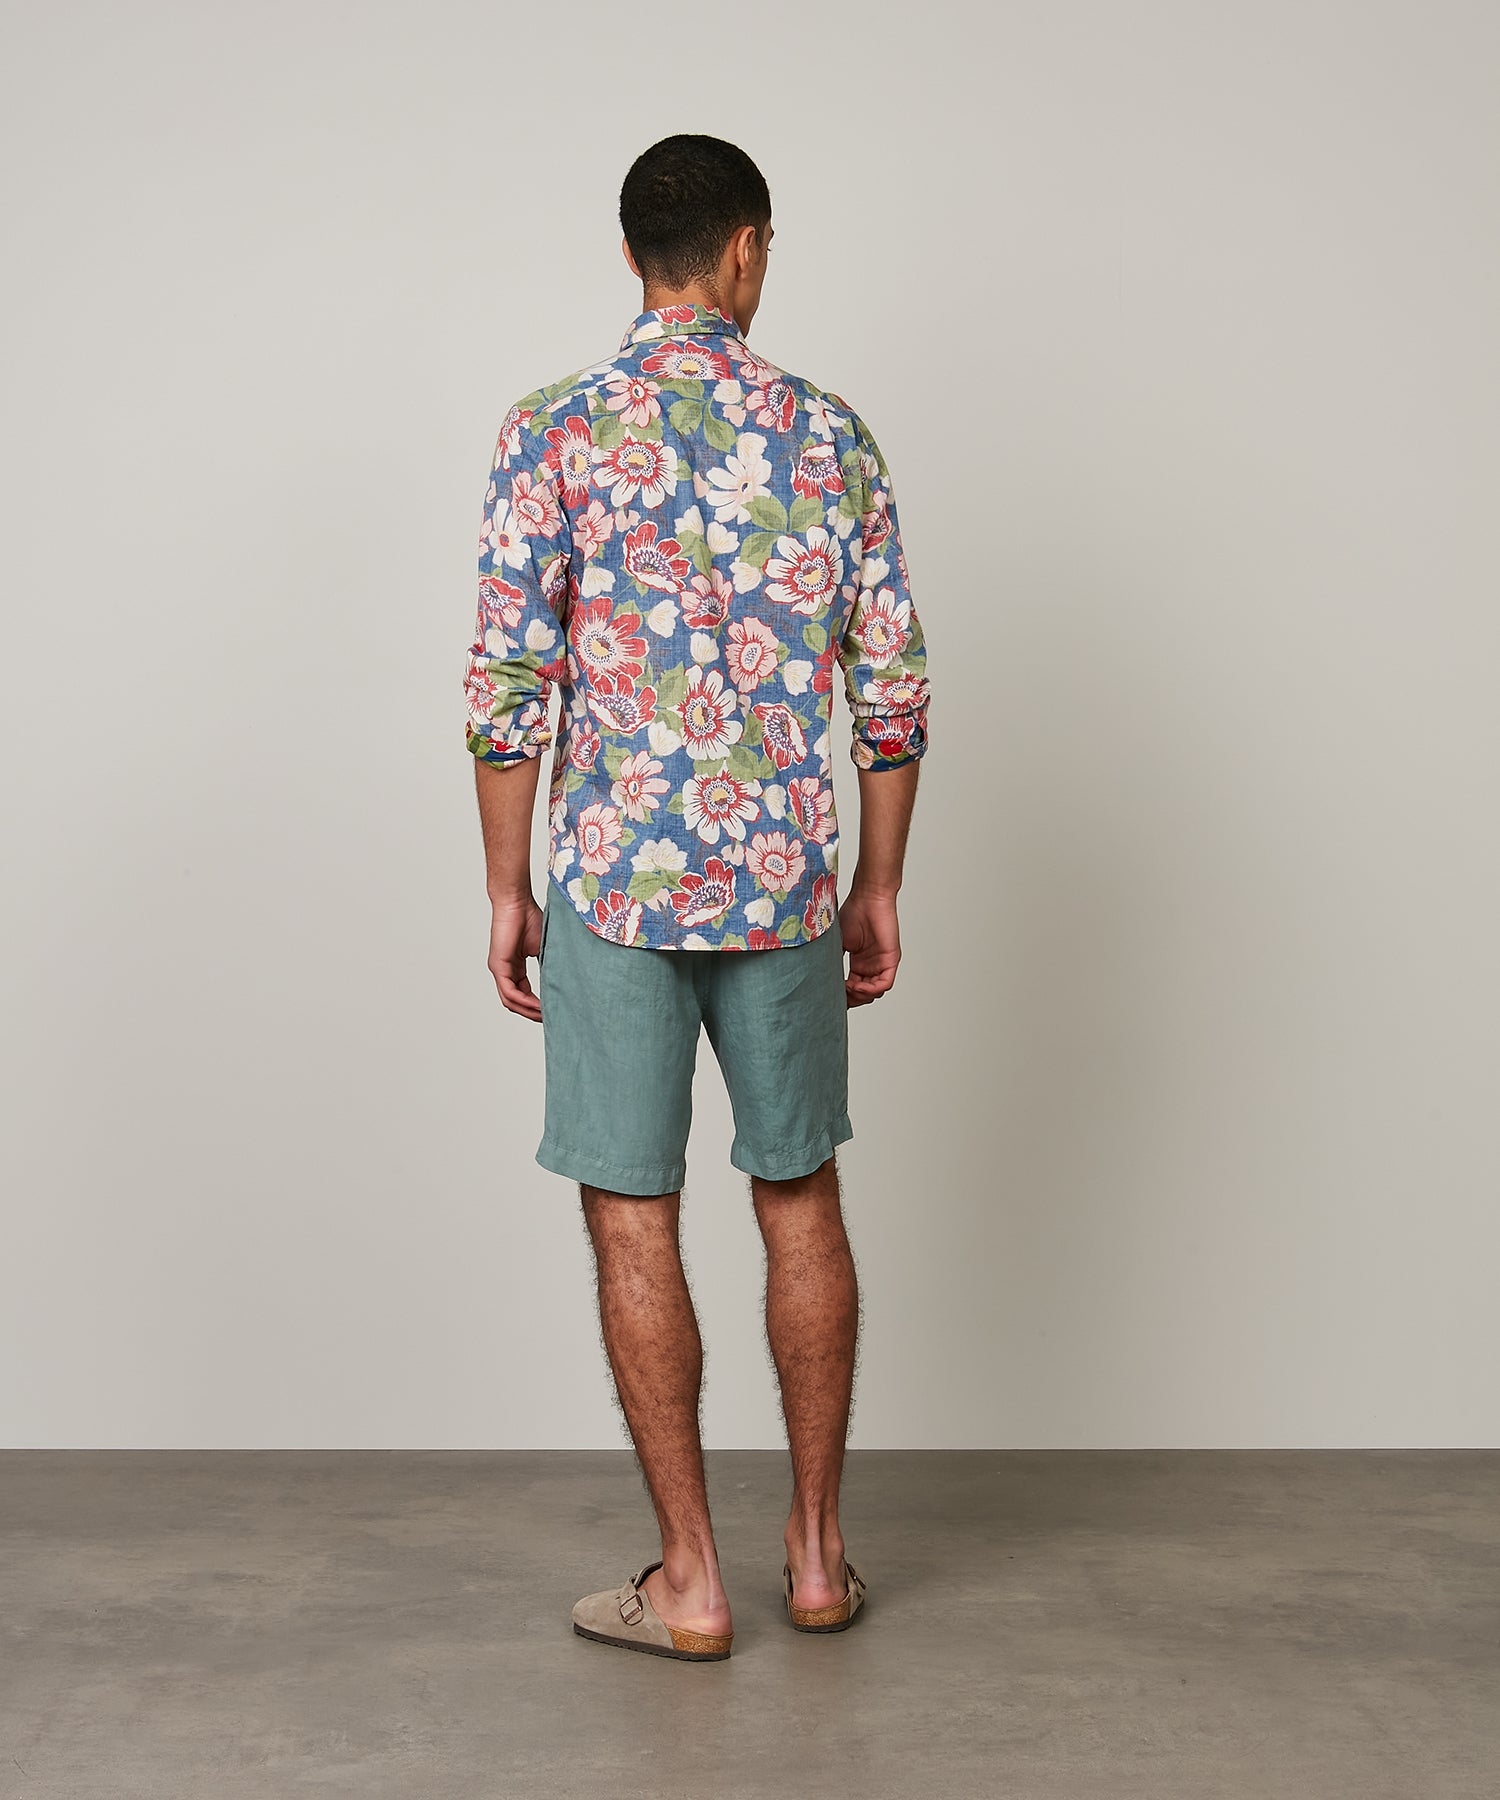 Men’s shorts  - Good Summer Dressing Starts From The Knee Up.